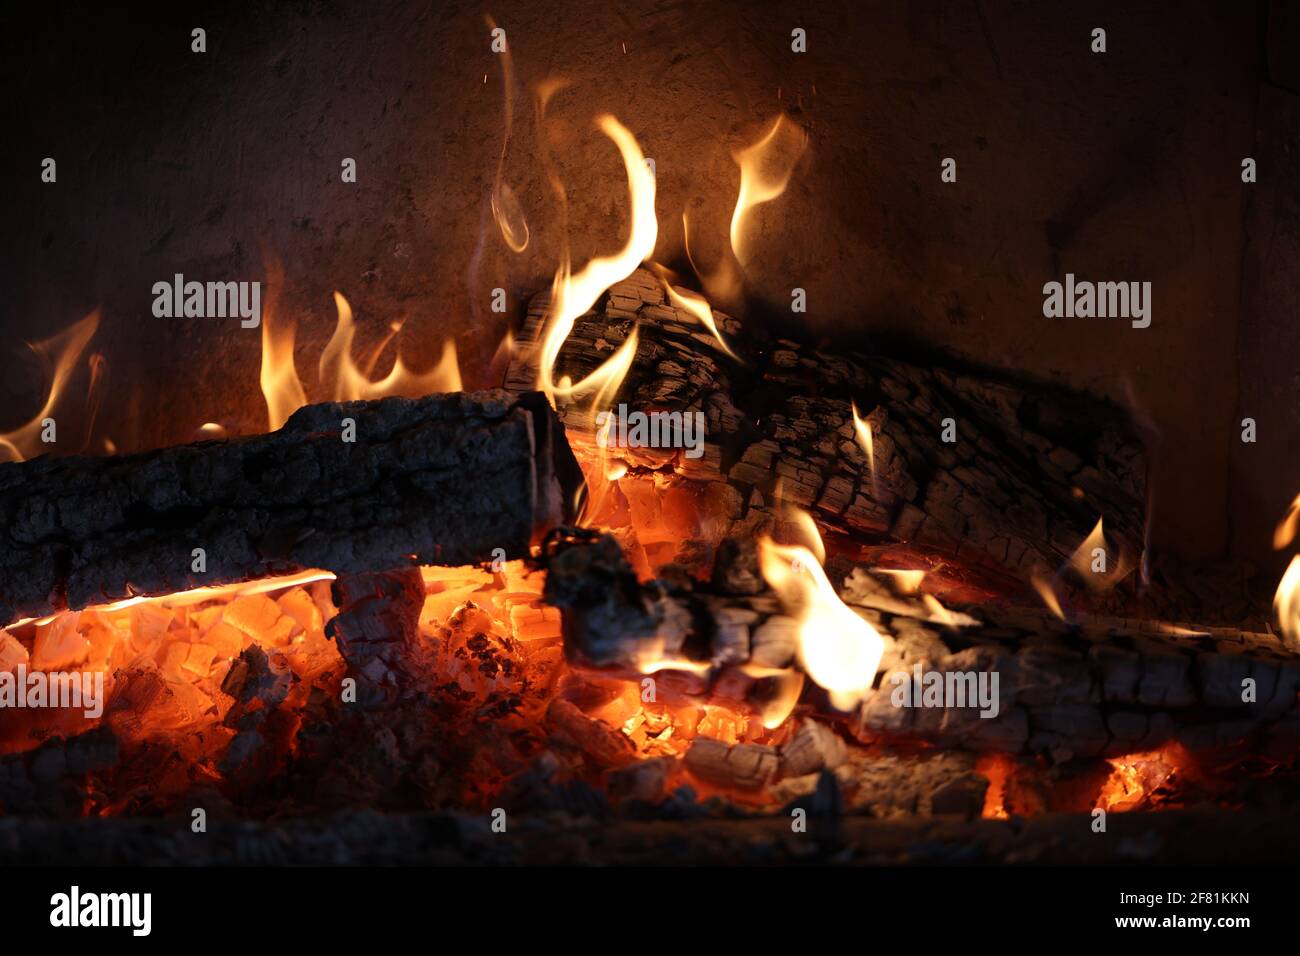 A nice fireplace with burning firewood Stock Photo